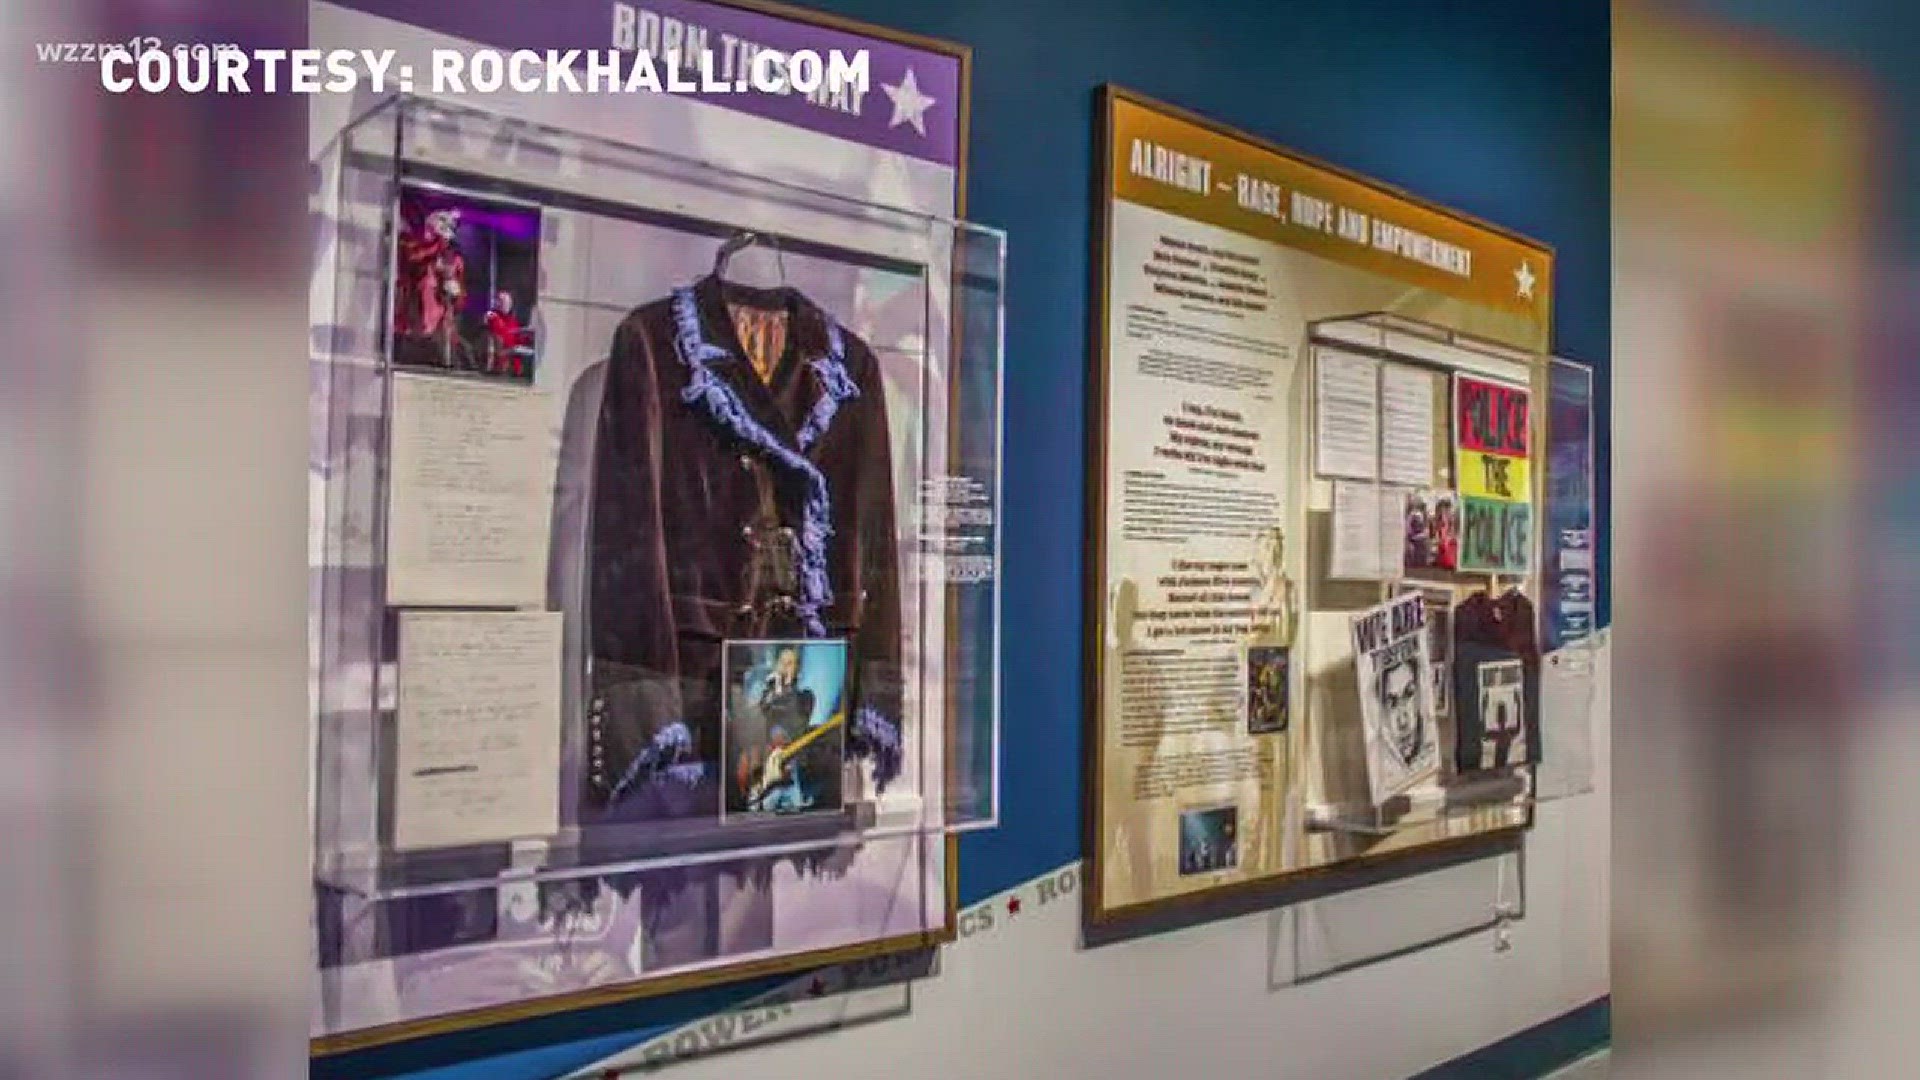 The Rock 'N Roll hall of fame exhibit is coming to the Gerald R. Ford presidential museum early next month.